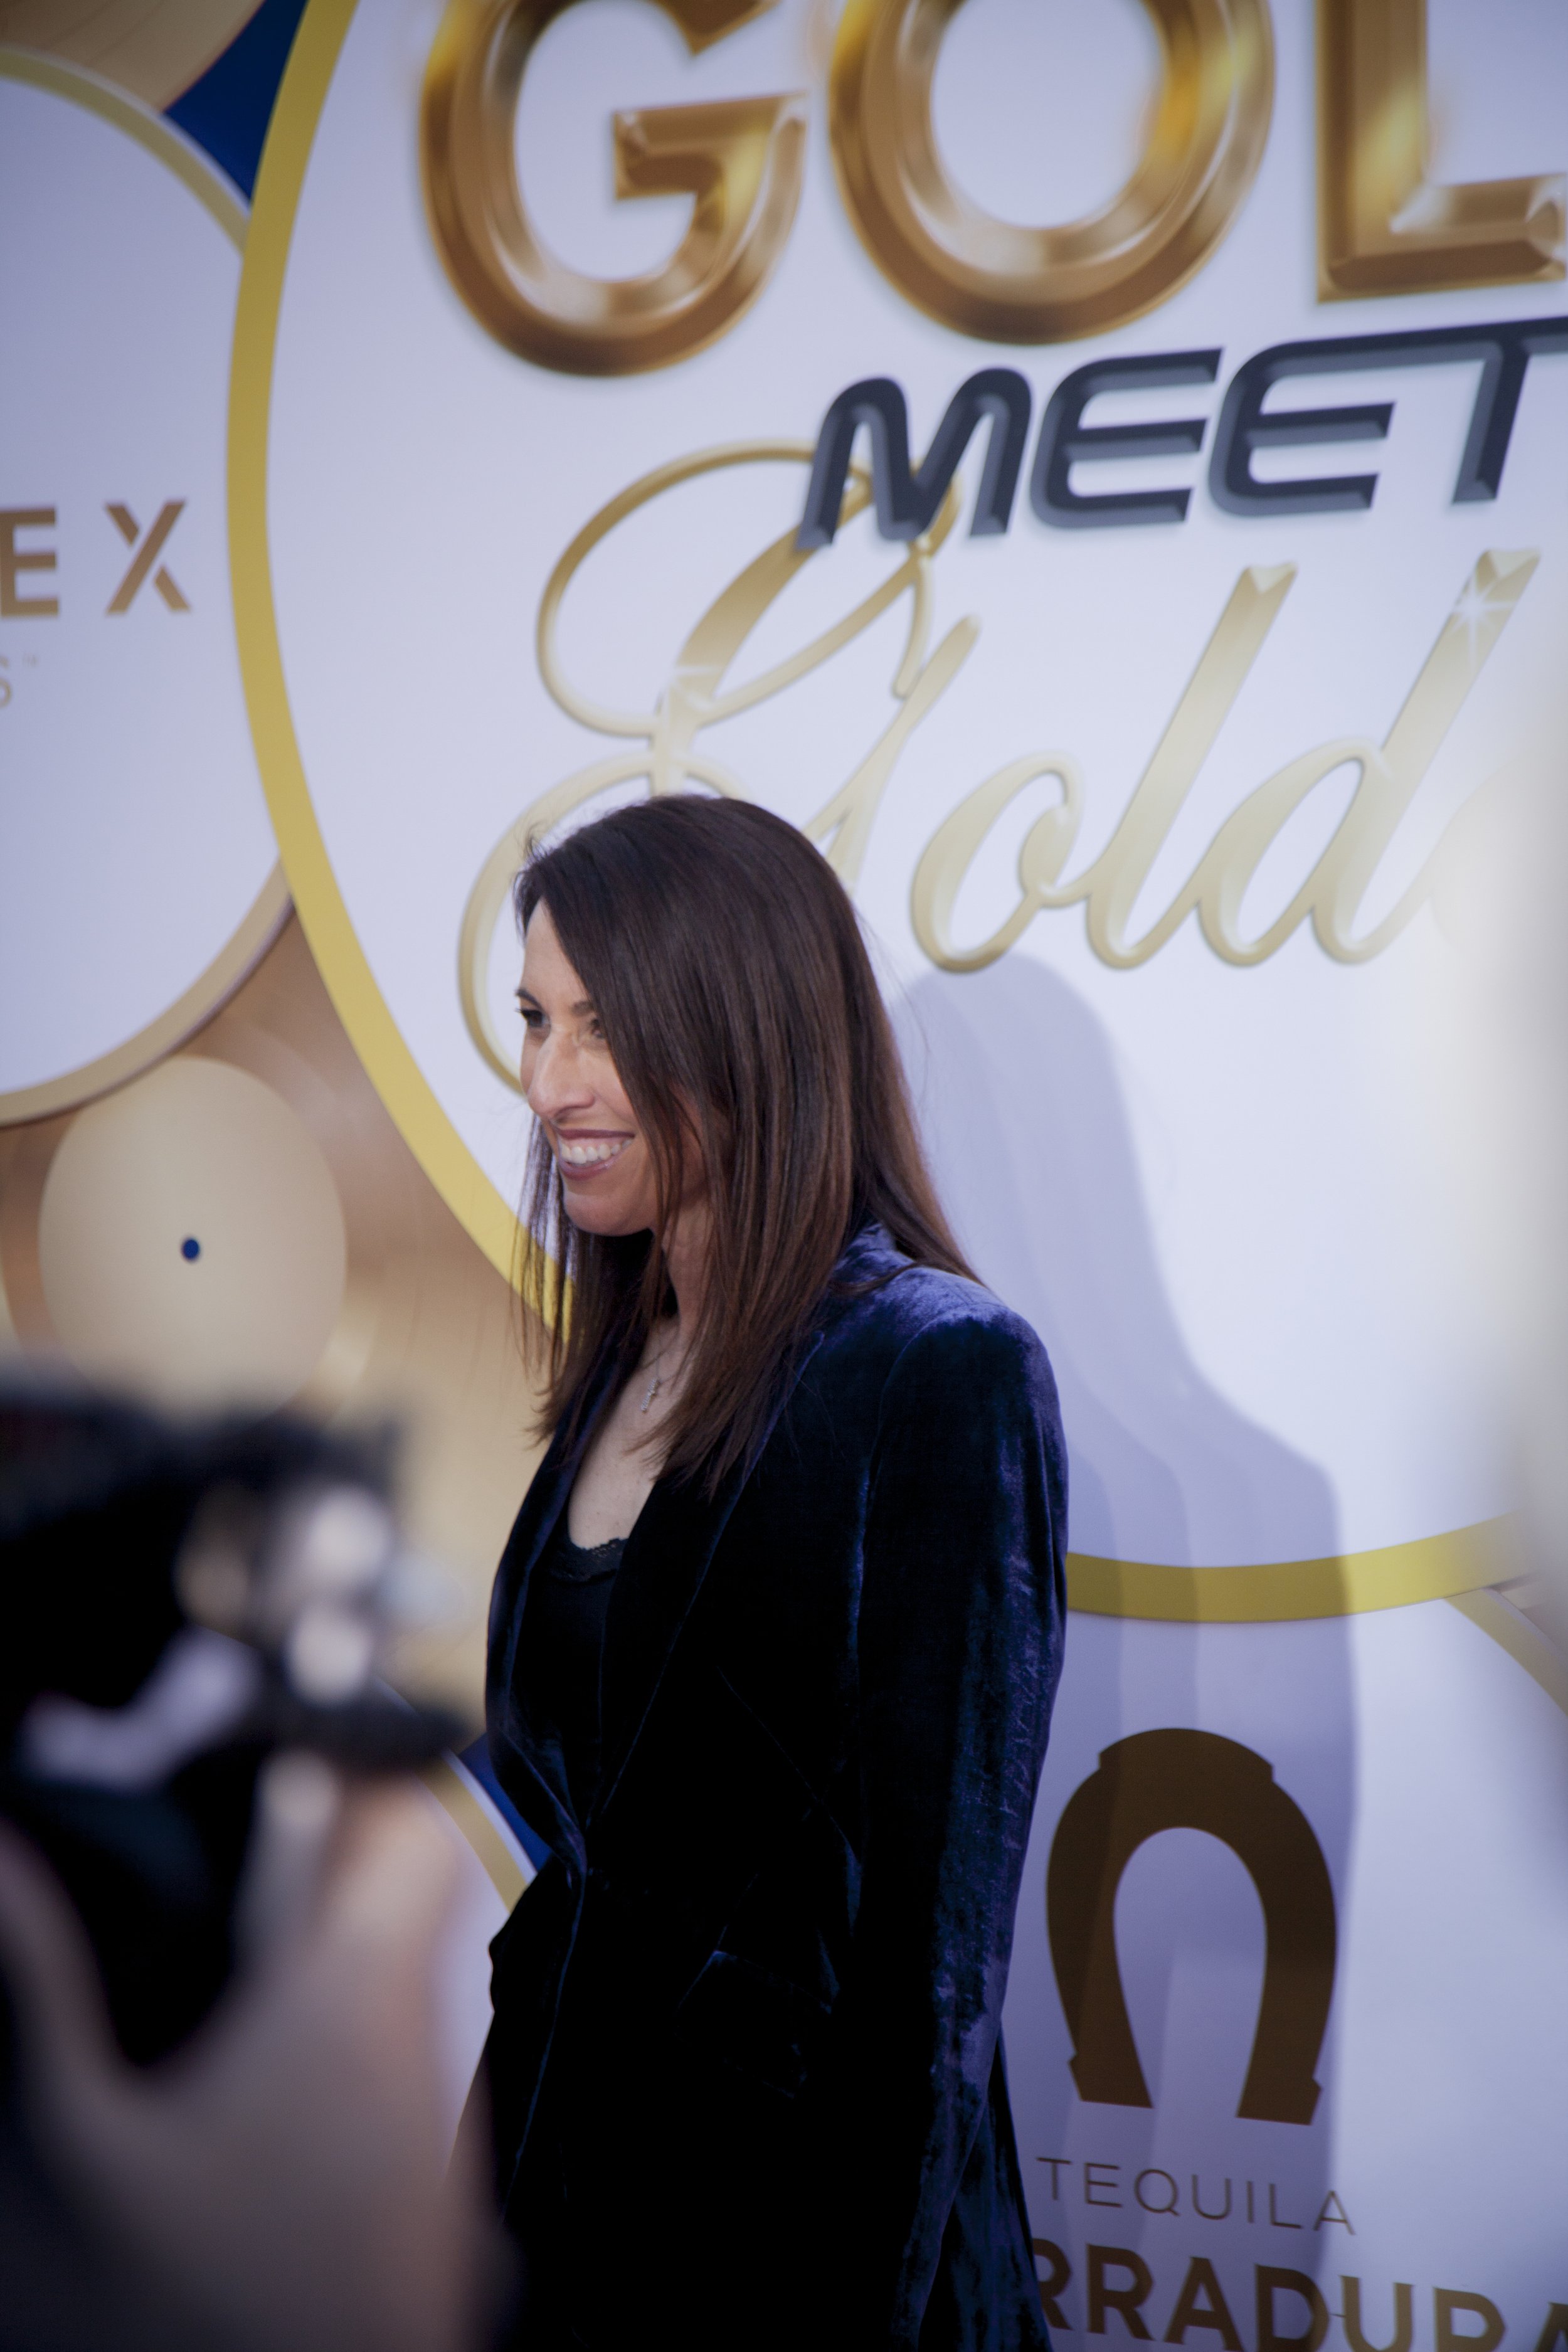 At Gold Meets Golden, Olympians meet Hollywood all for Angel City